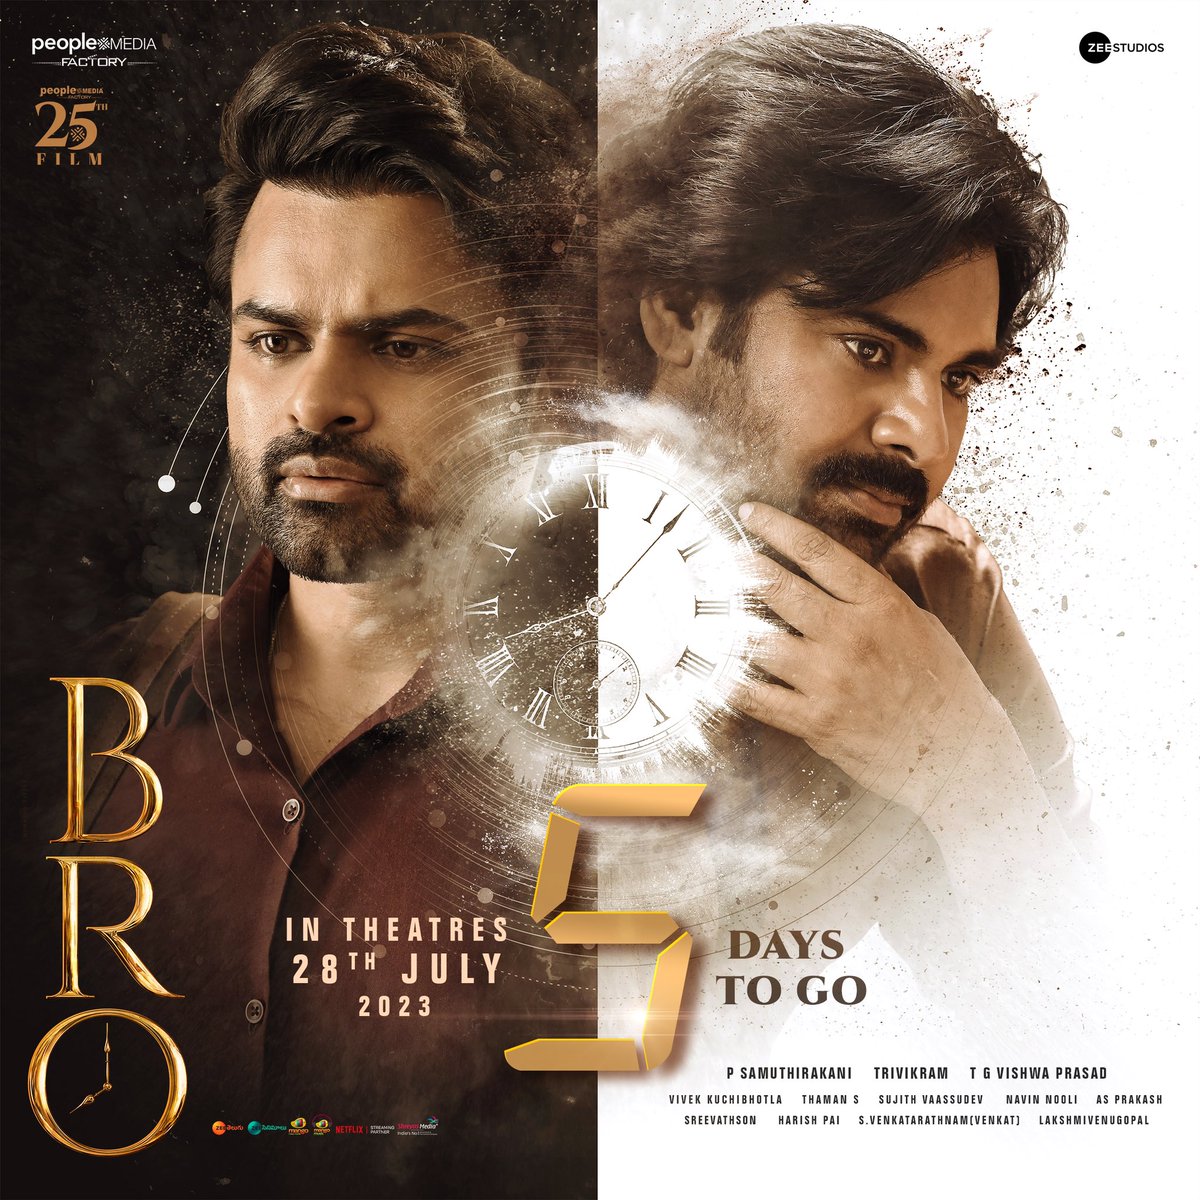 Thank you all for your love for #BroTrailer 🤗 You will love the film even more. Meet you at the big screen in 5 days. #BroTheAvatar #BroFromJuly28th